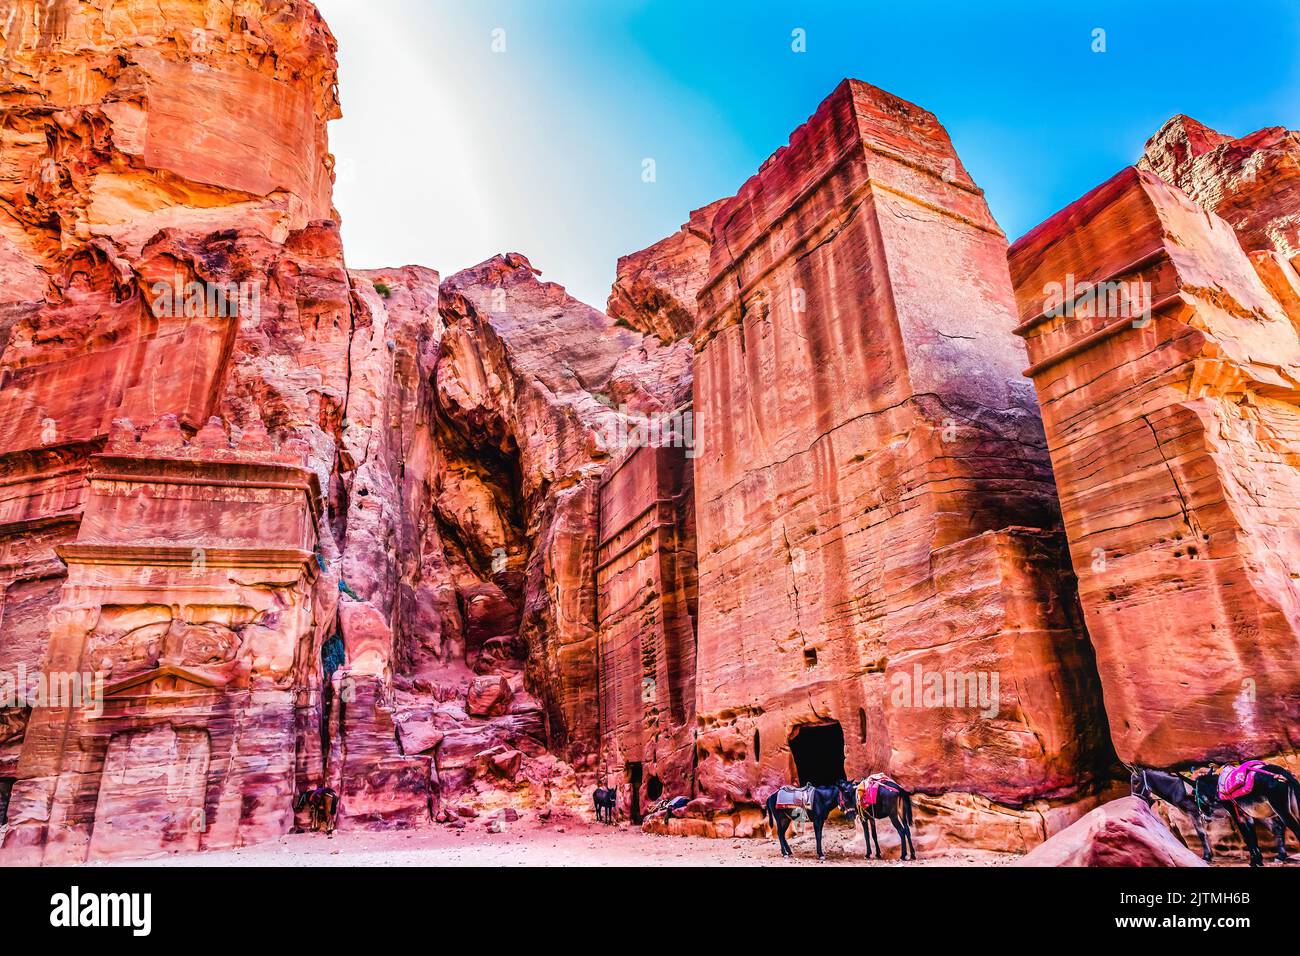 Rose Red Rock Tomb Afternoon Donkeys Street of Facades Petra Jordan Built by Nabataens in 200 BC to 400 AD  Afternoon turns yellow canyon walls in to Stock Photo